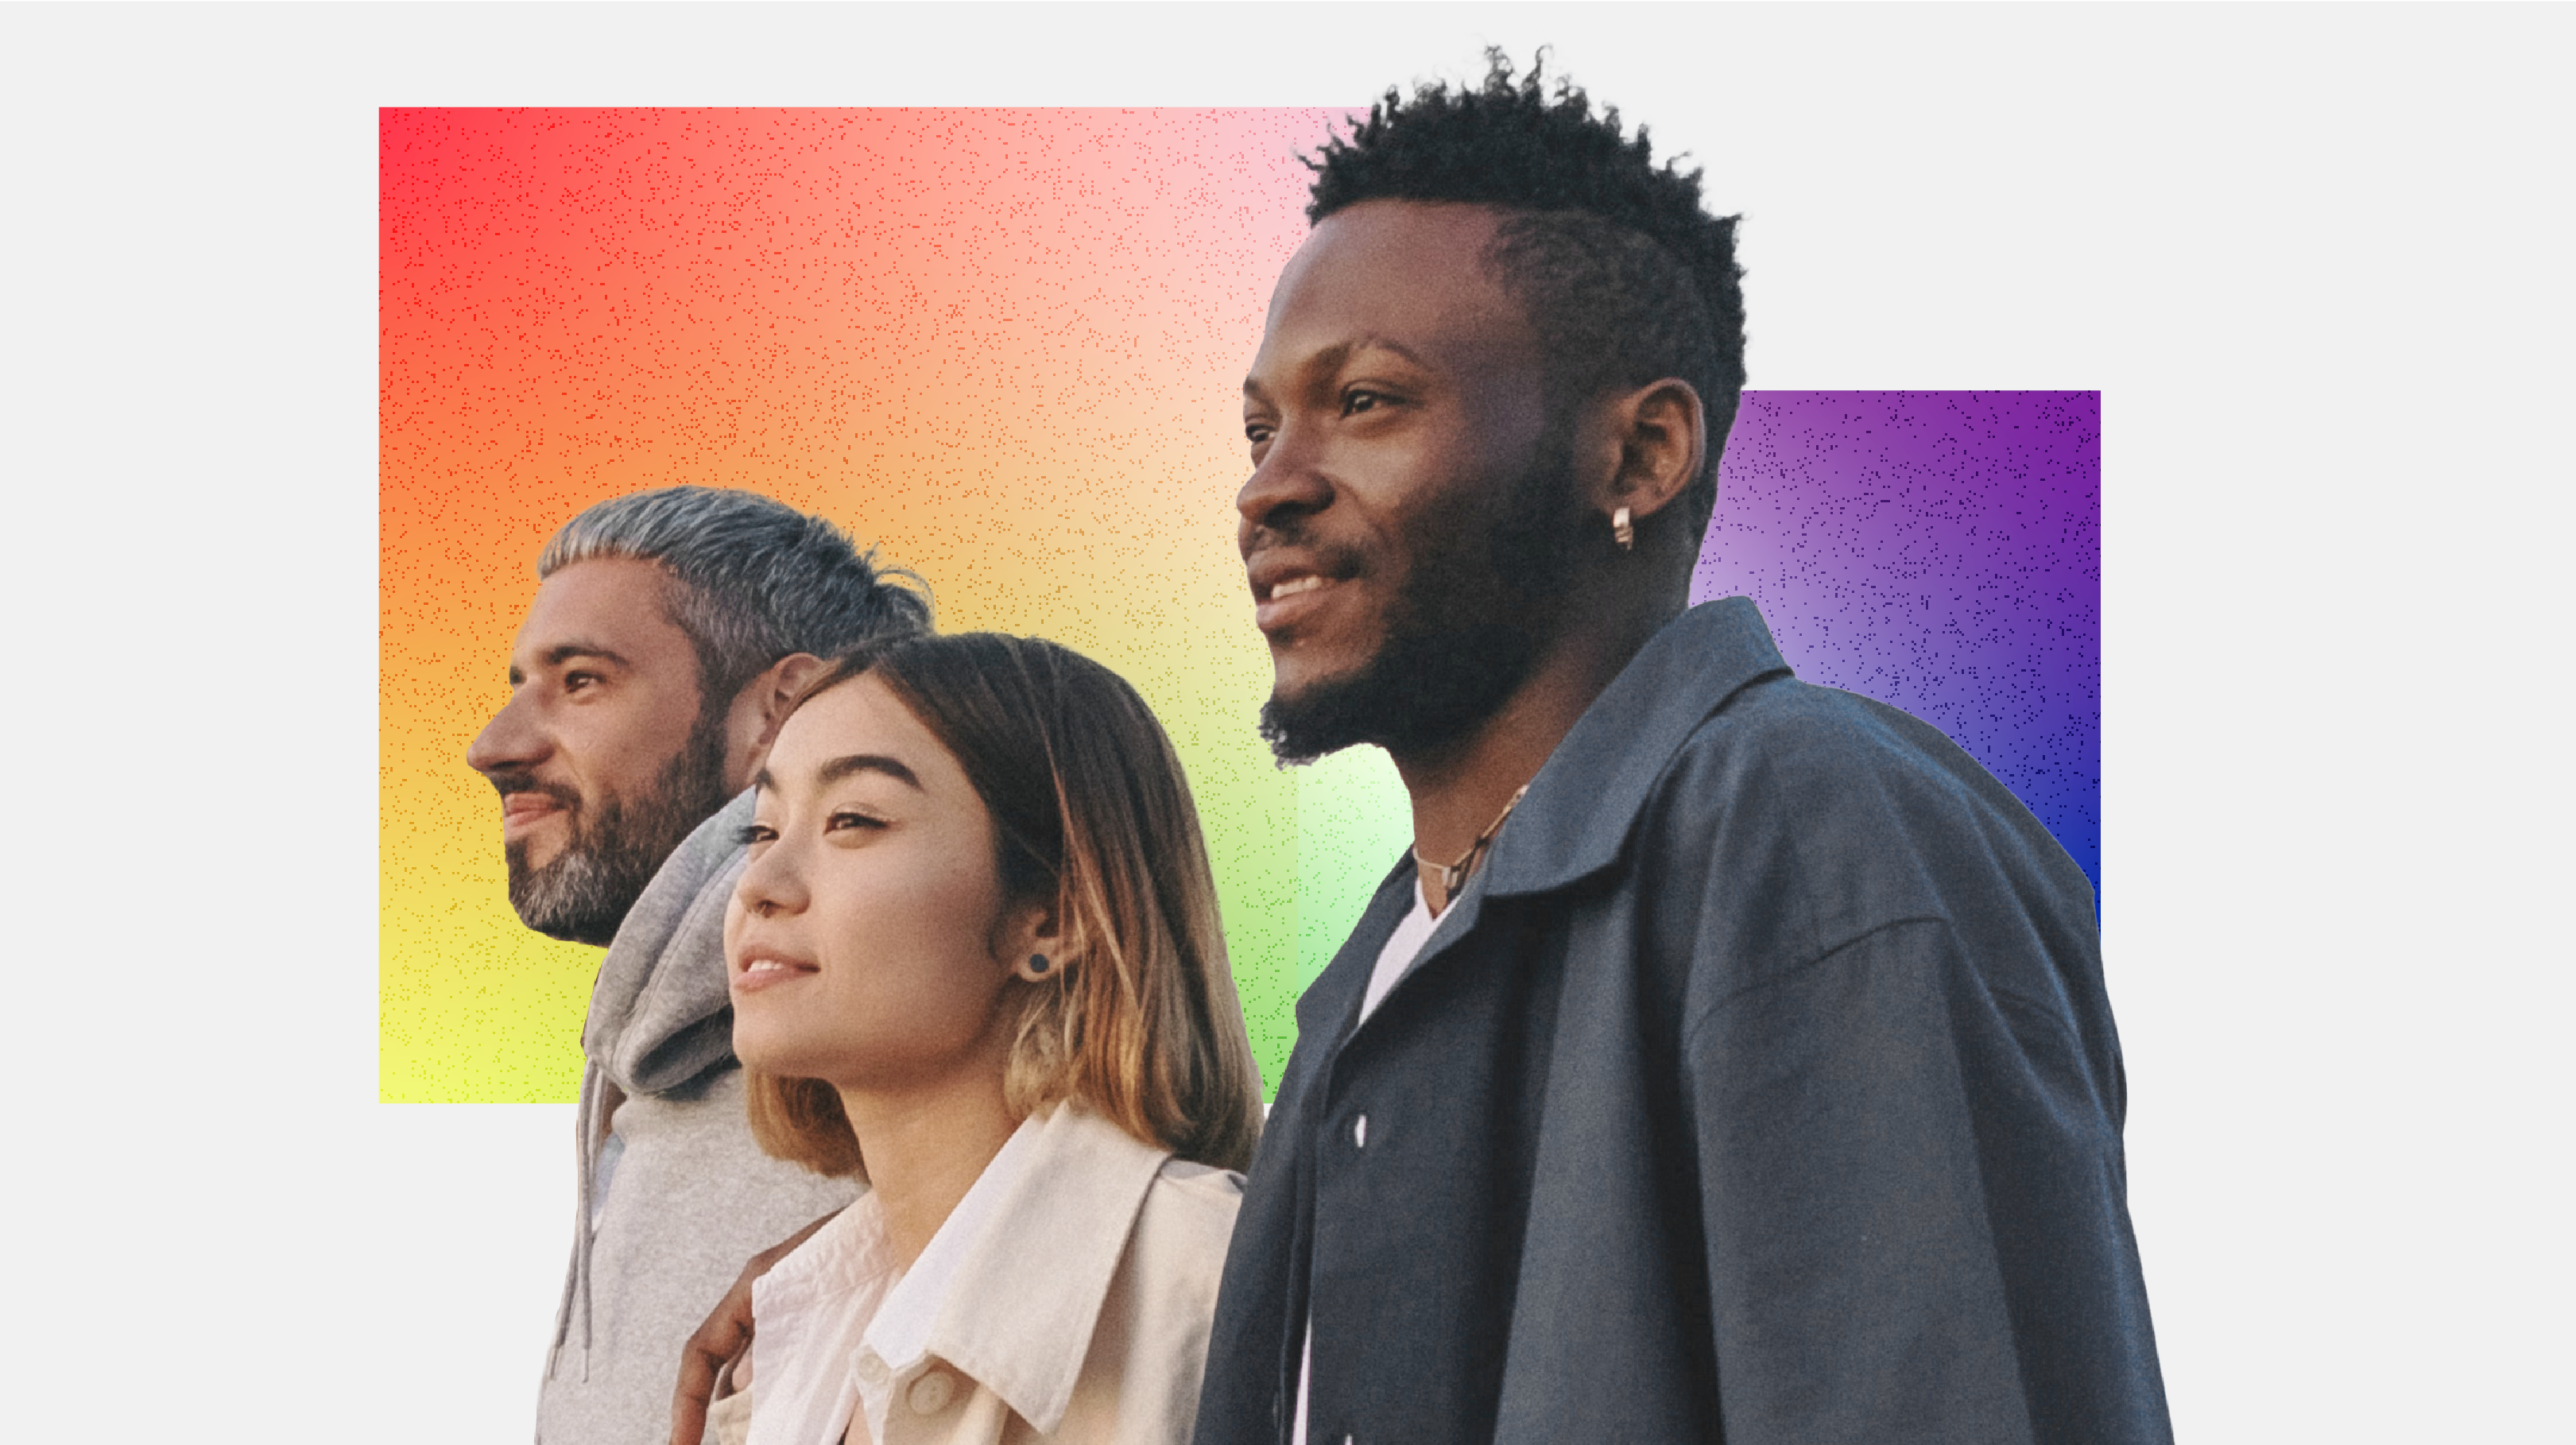  5 Ways to Support LGBTQIA+ Employees in the Workplace